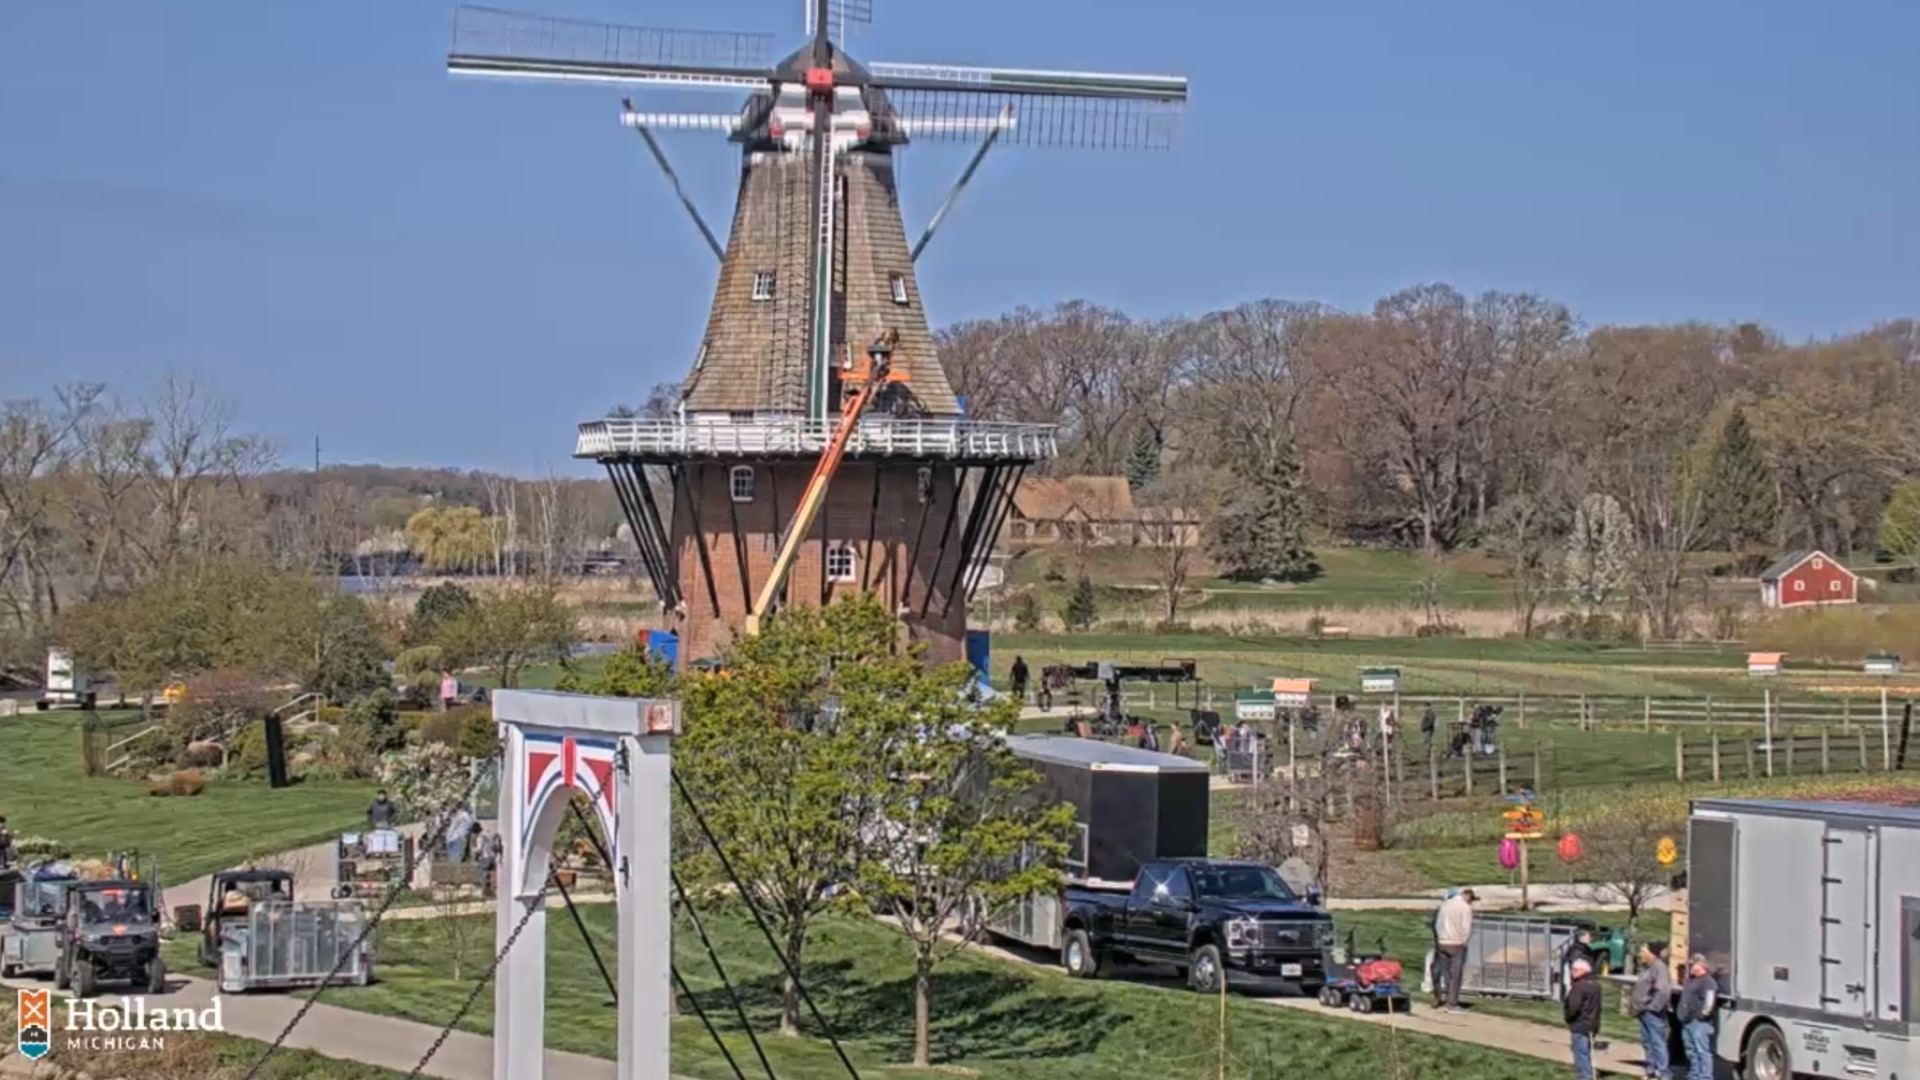 Filming for the Nicole Kidman-led thriller, "Holland, Michigan," has begun on Holland's famous Windmill Island on Monday.